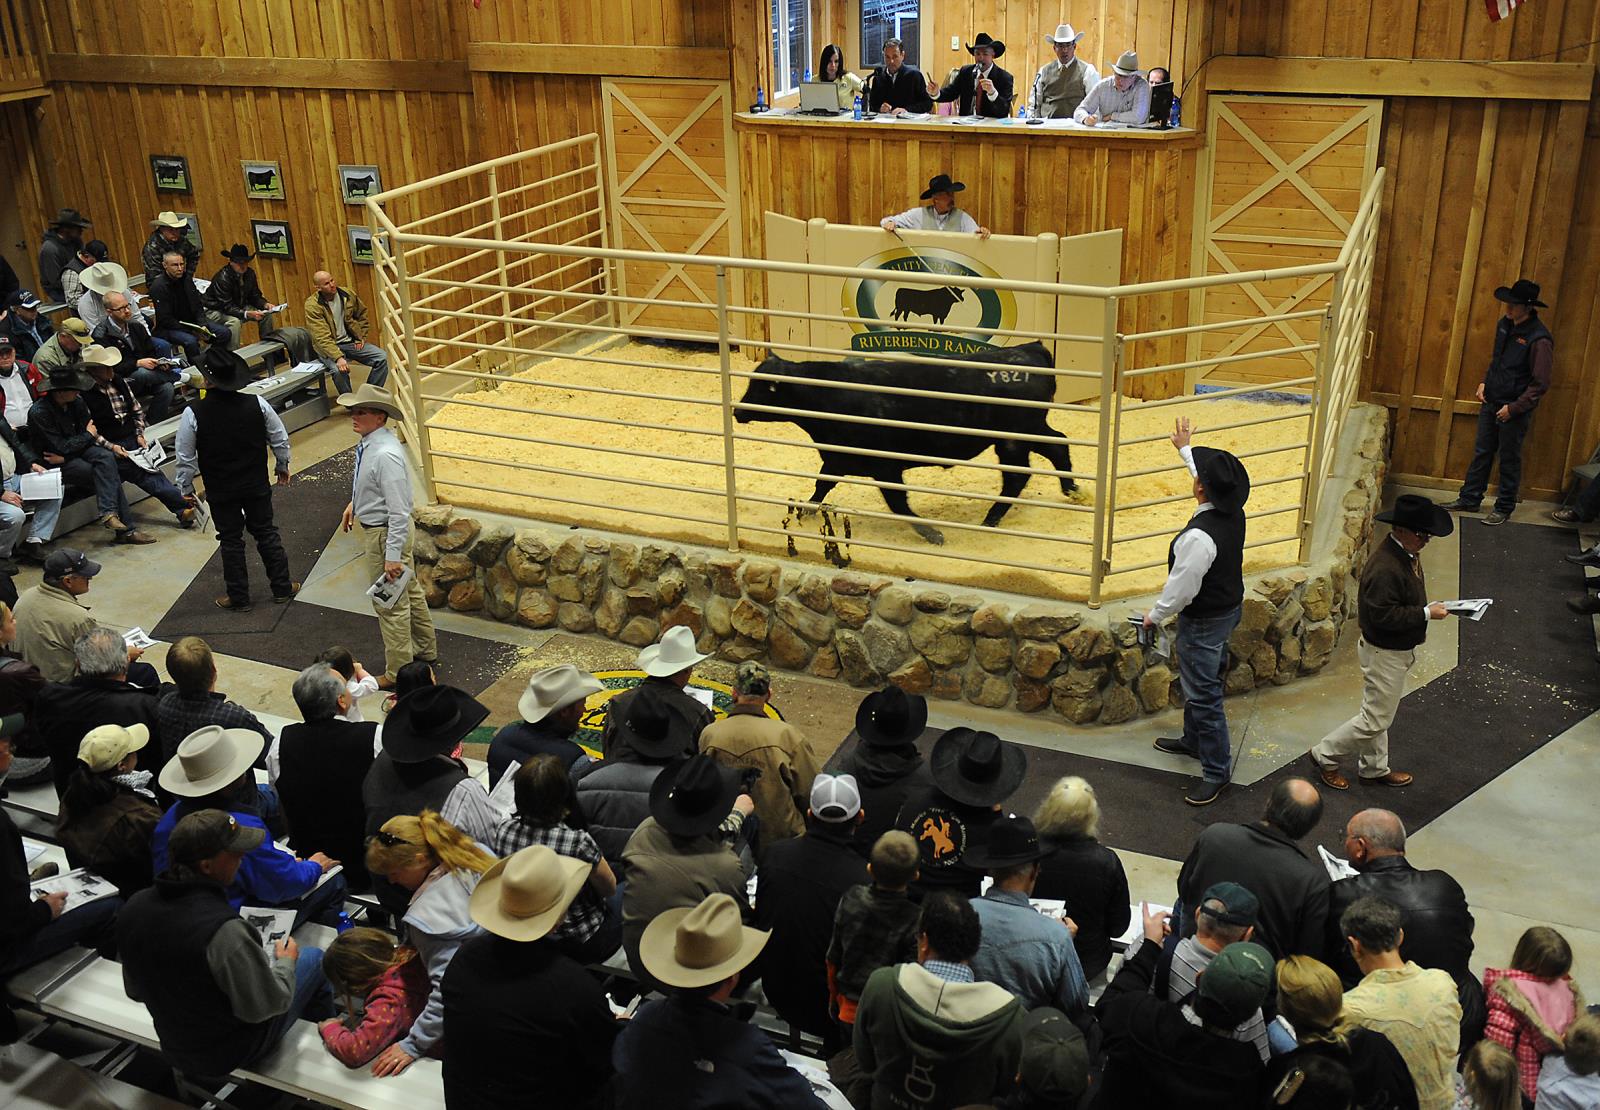 A bull auction at the Riverbend Ranch.